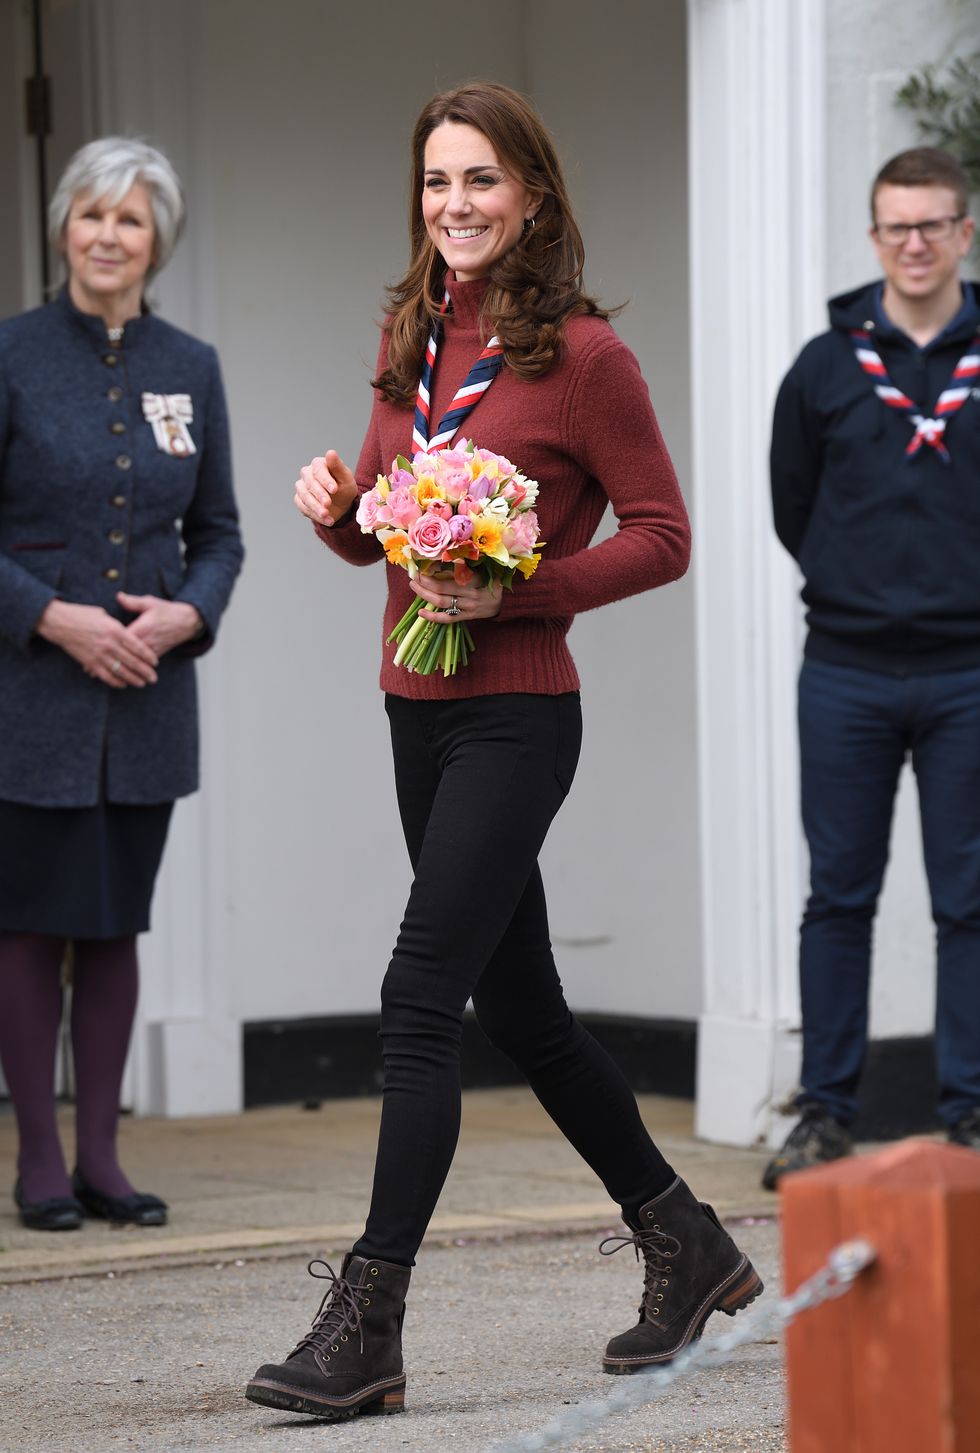 The Duchess Of Cambridge Visits The Scout's Early Years Pilot At Gilwell Park